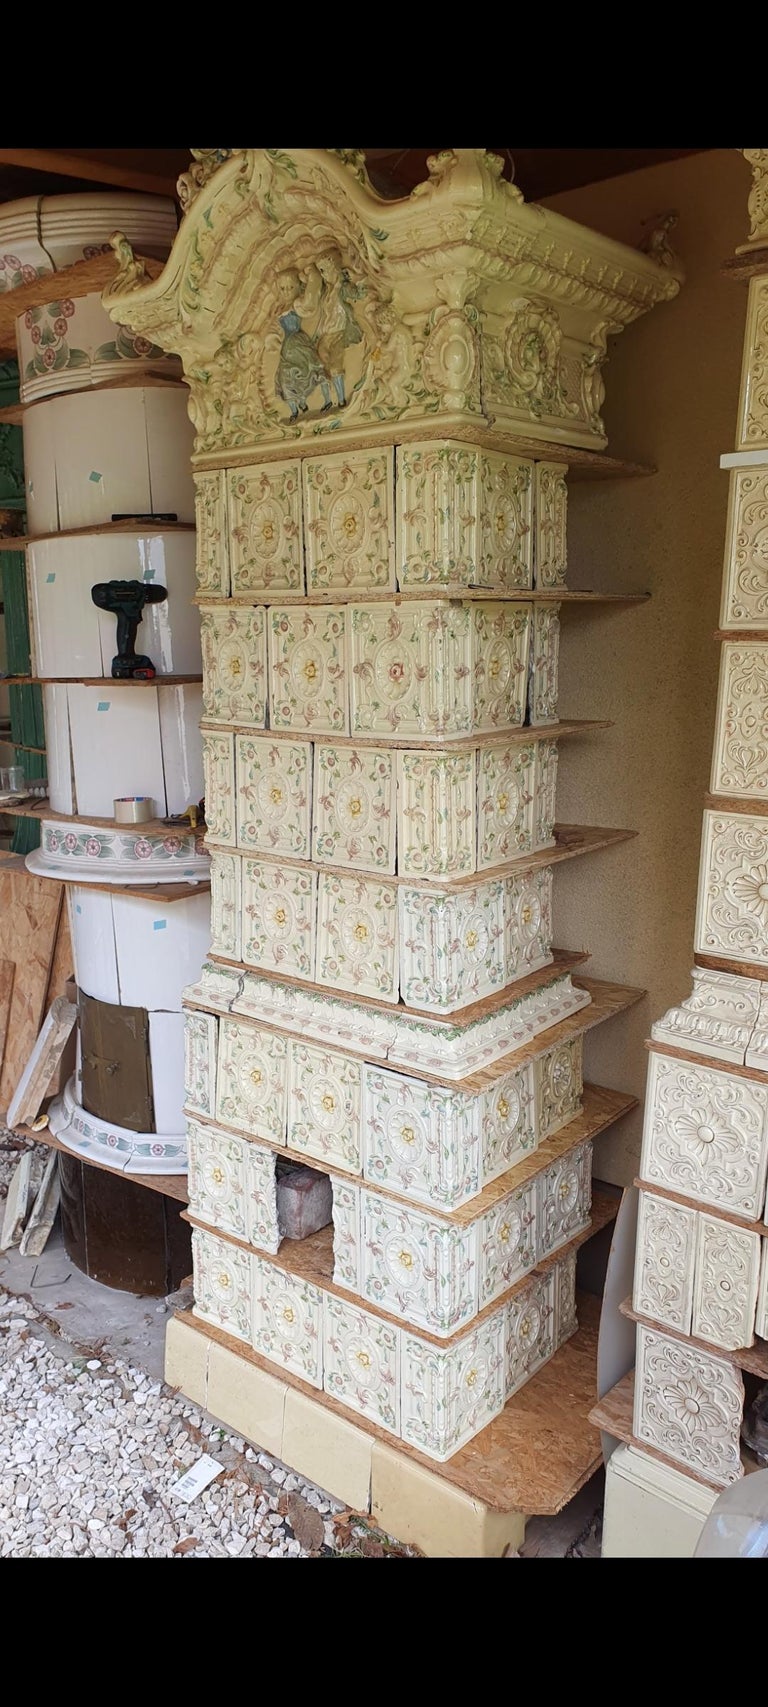 Stove Tiles from Tiled Stove Meissen For Sale at 1stDibs